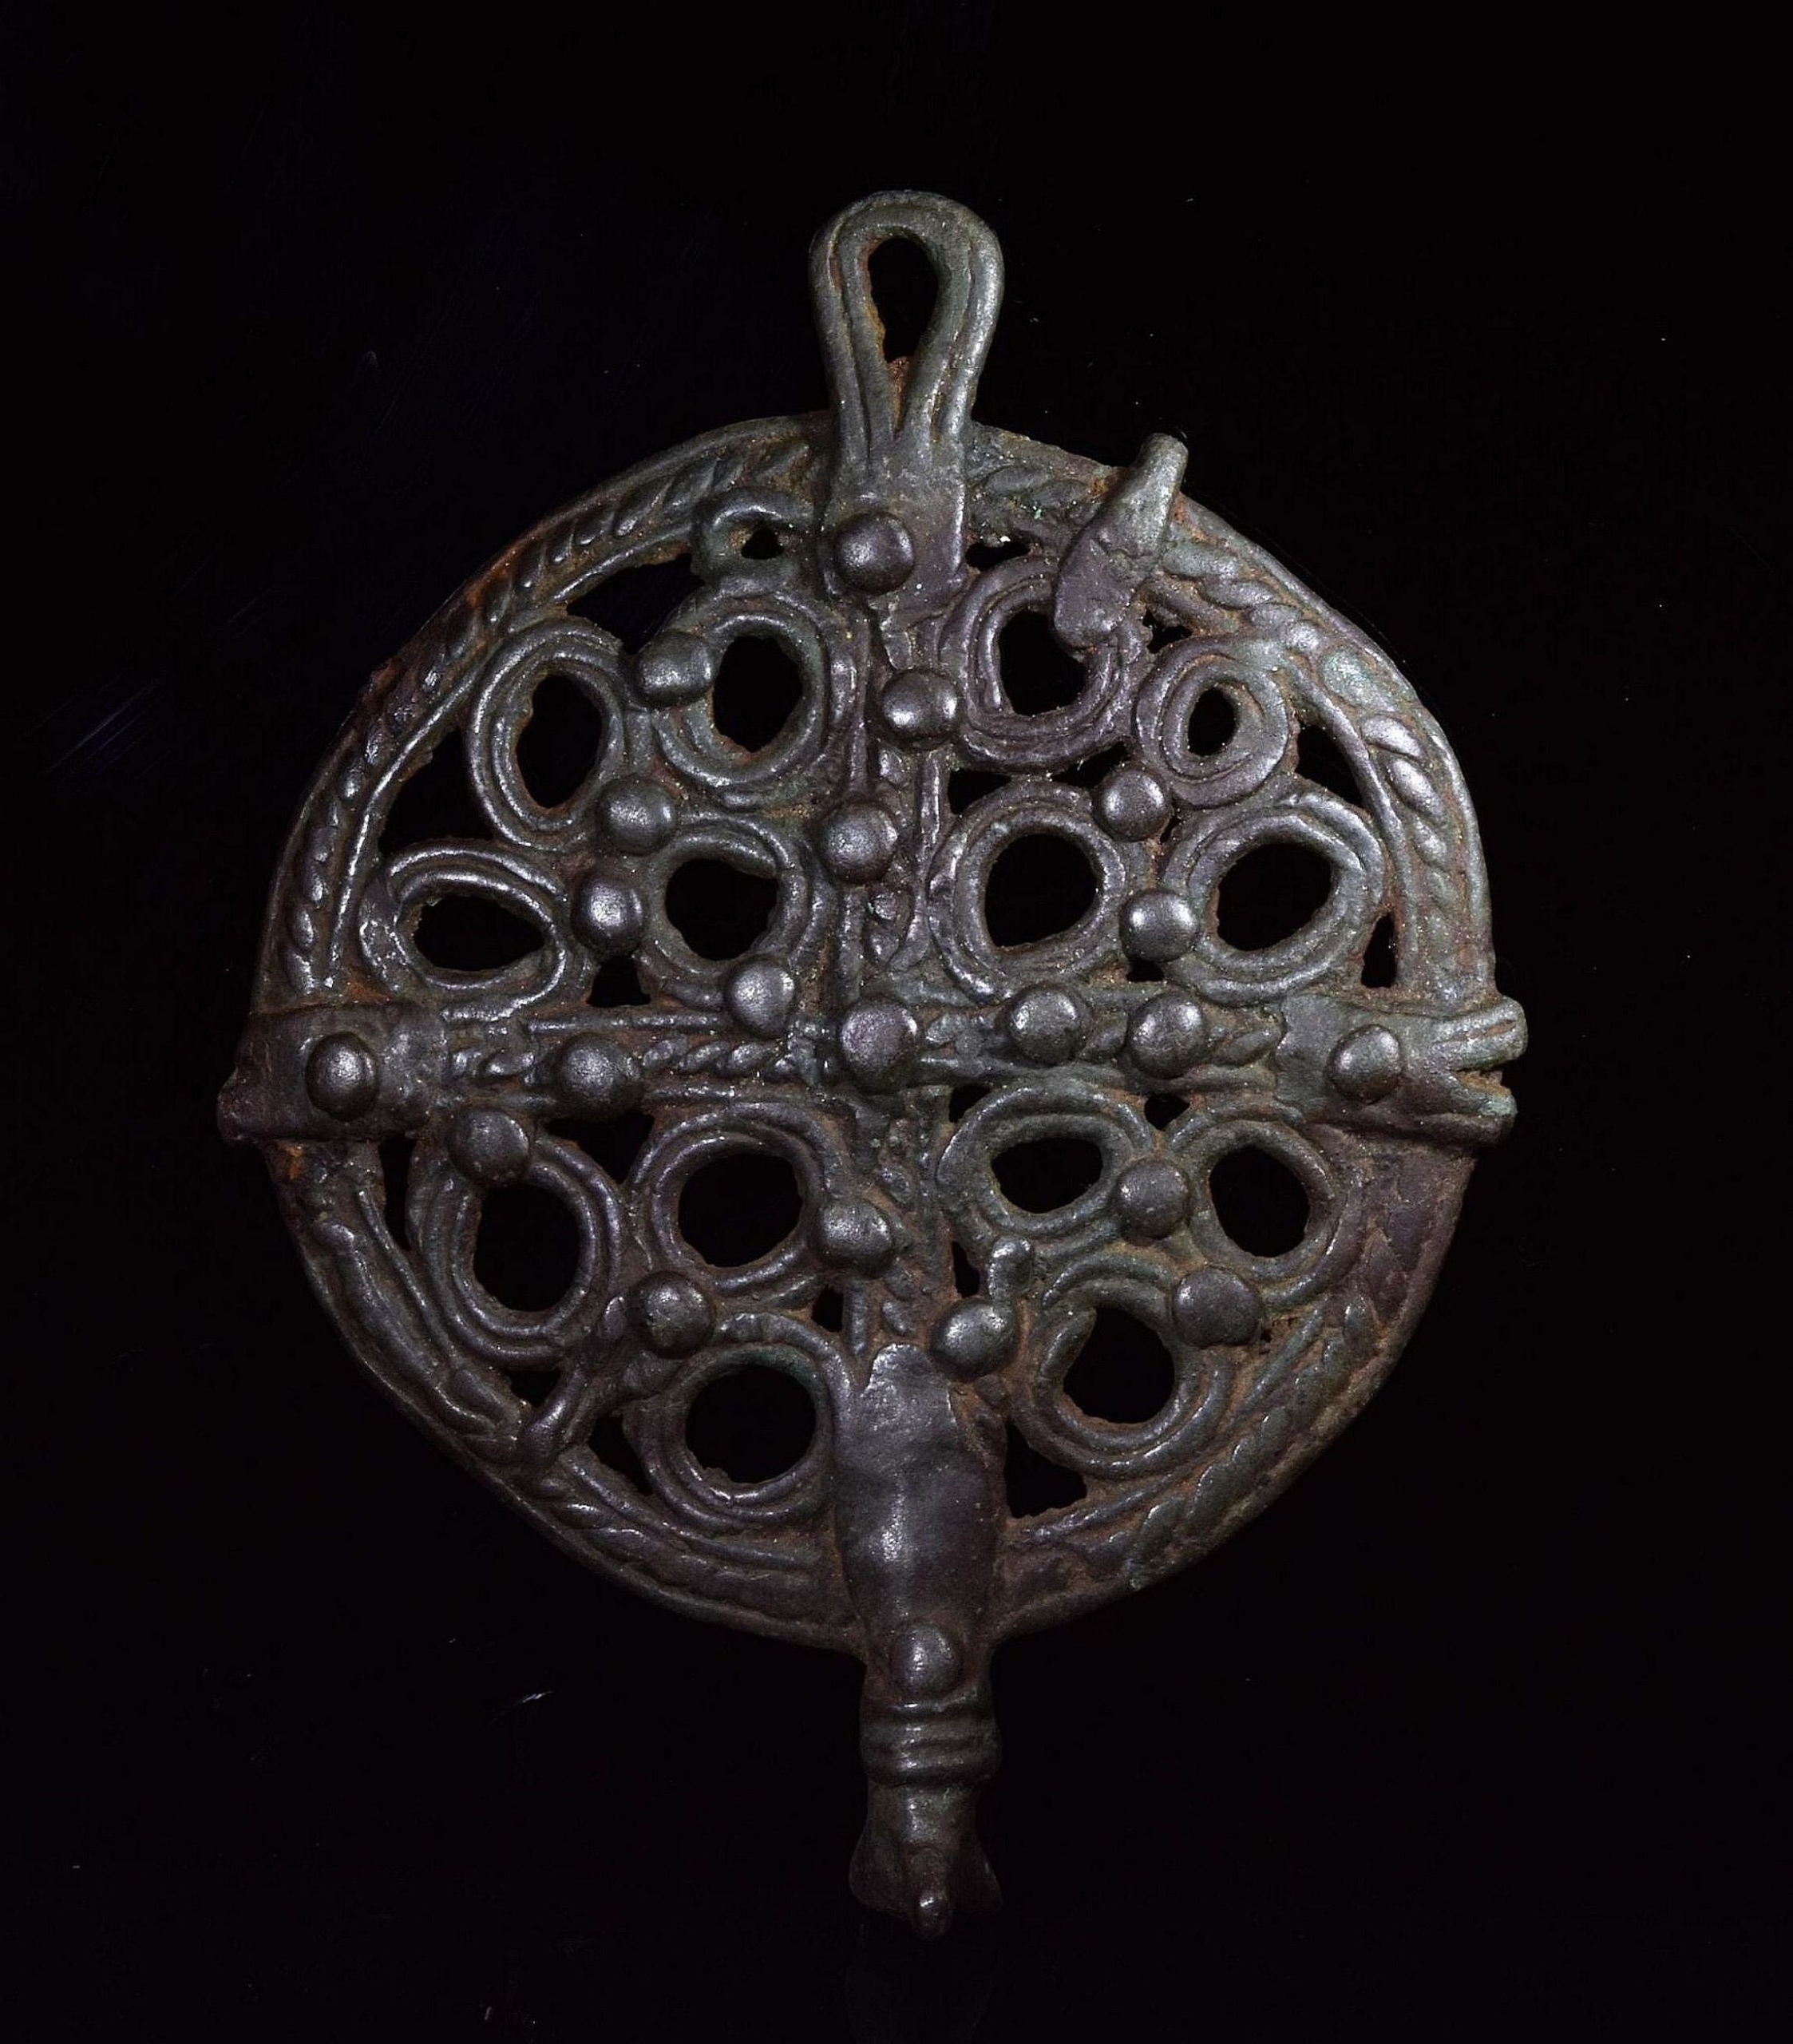 Bronze Age circular pendant in ornamental cross-in-circle design, 99mm x 75mm, 54g. , C. 800-600 BC. Realized £140 2020 Image courtesy of Pax Romana Auctions and LiveAuctioneers.